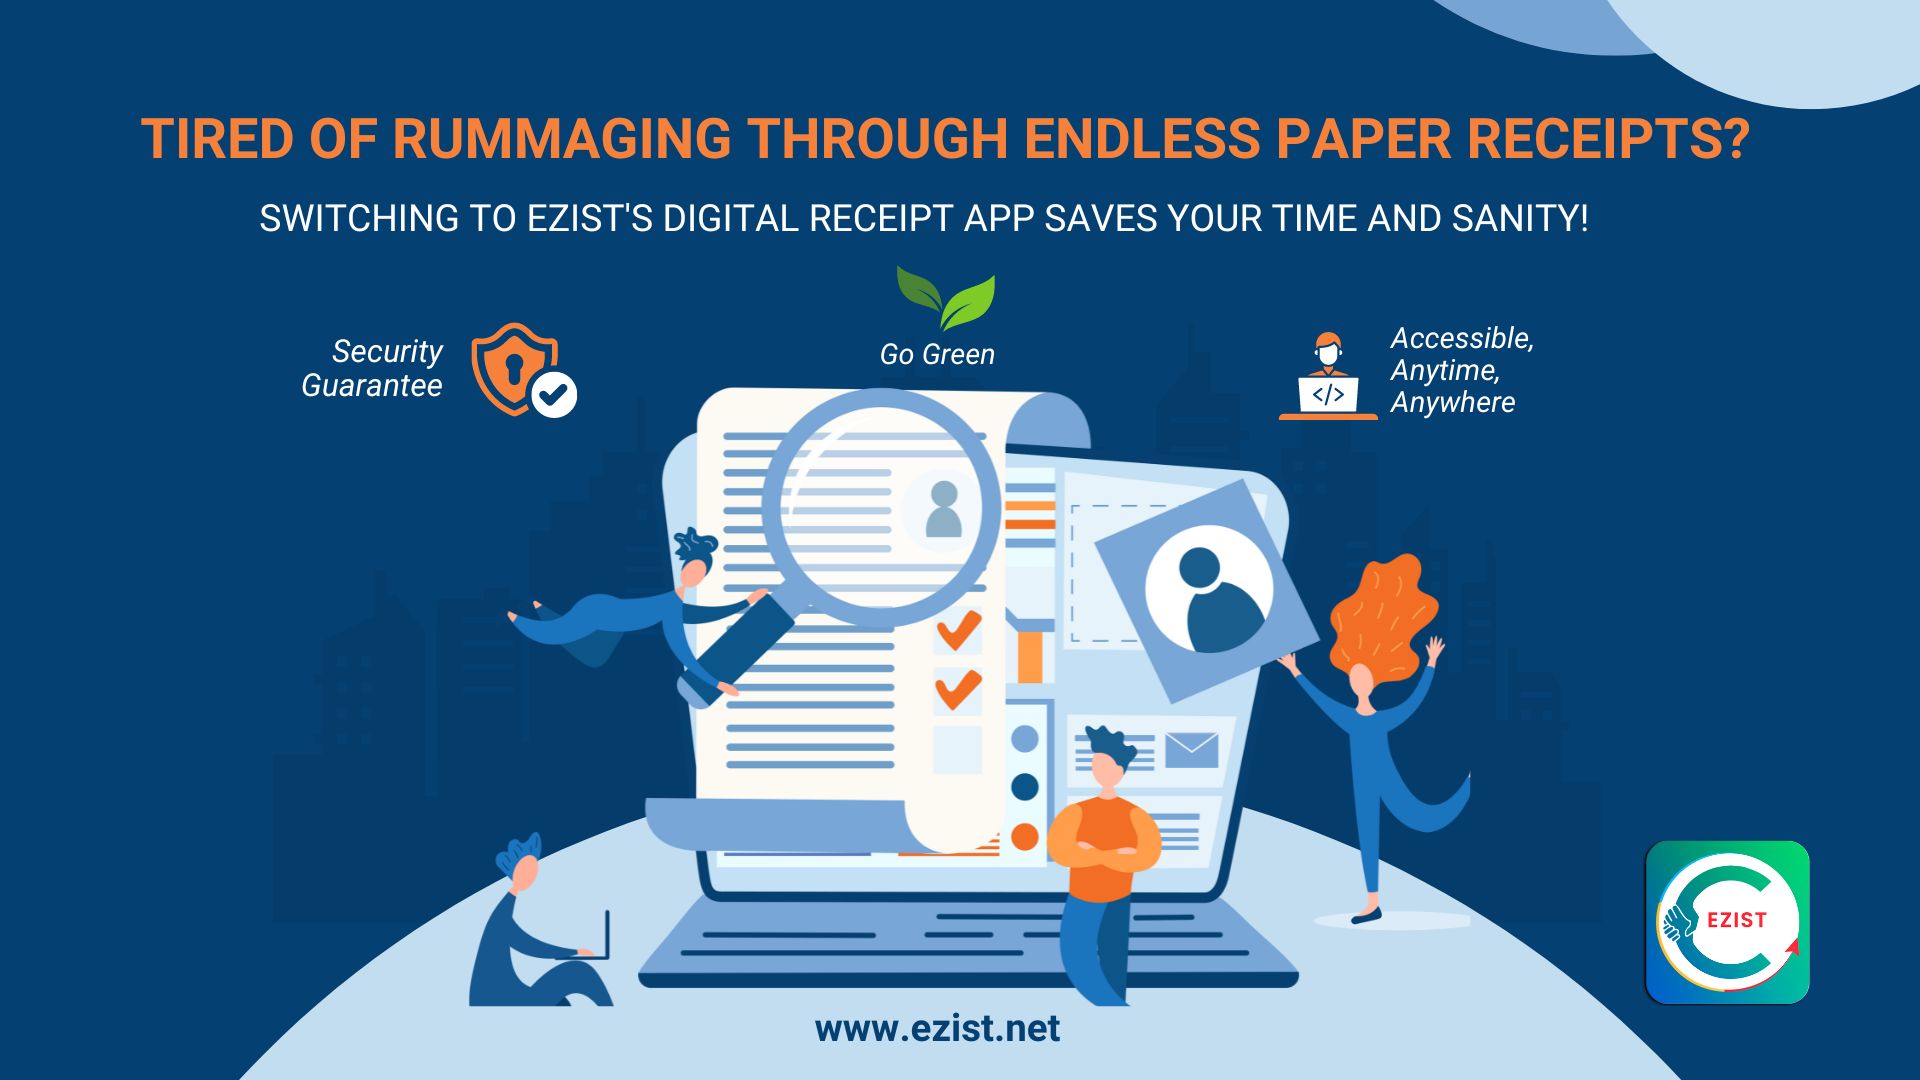 Why Switching to Ezist's Digital Receipt App Saves Your Time